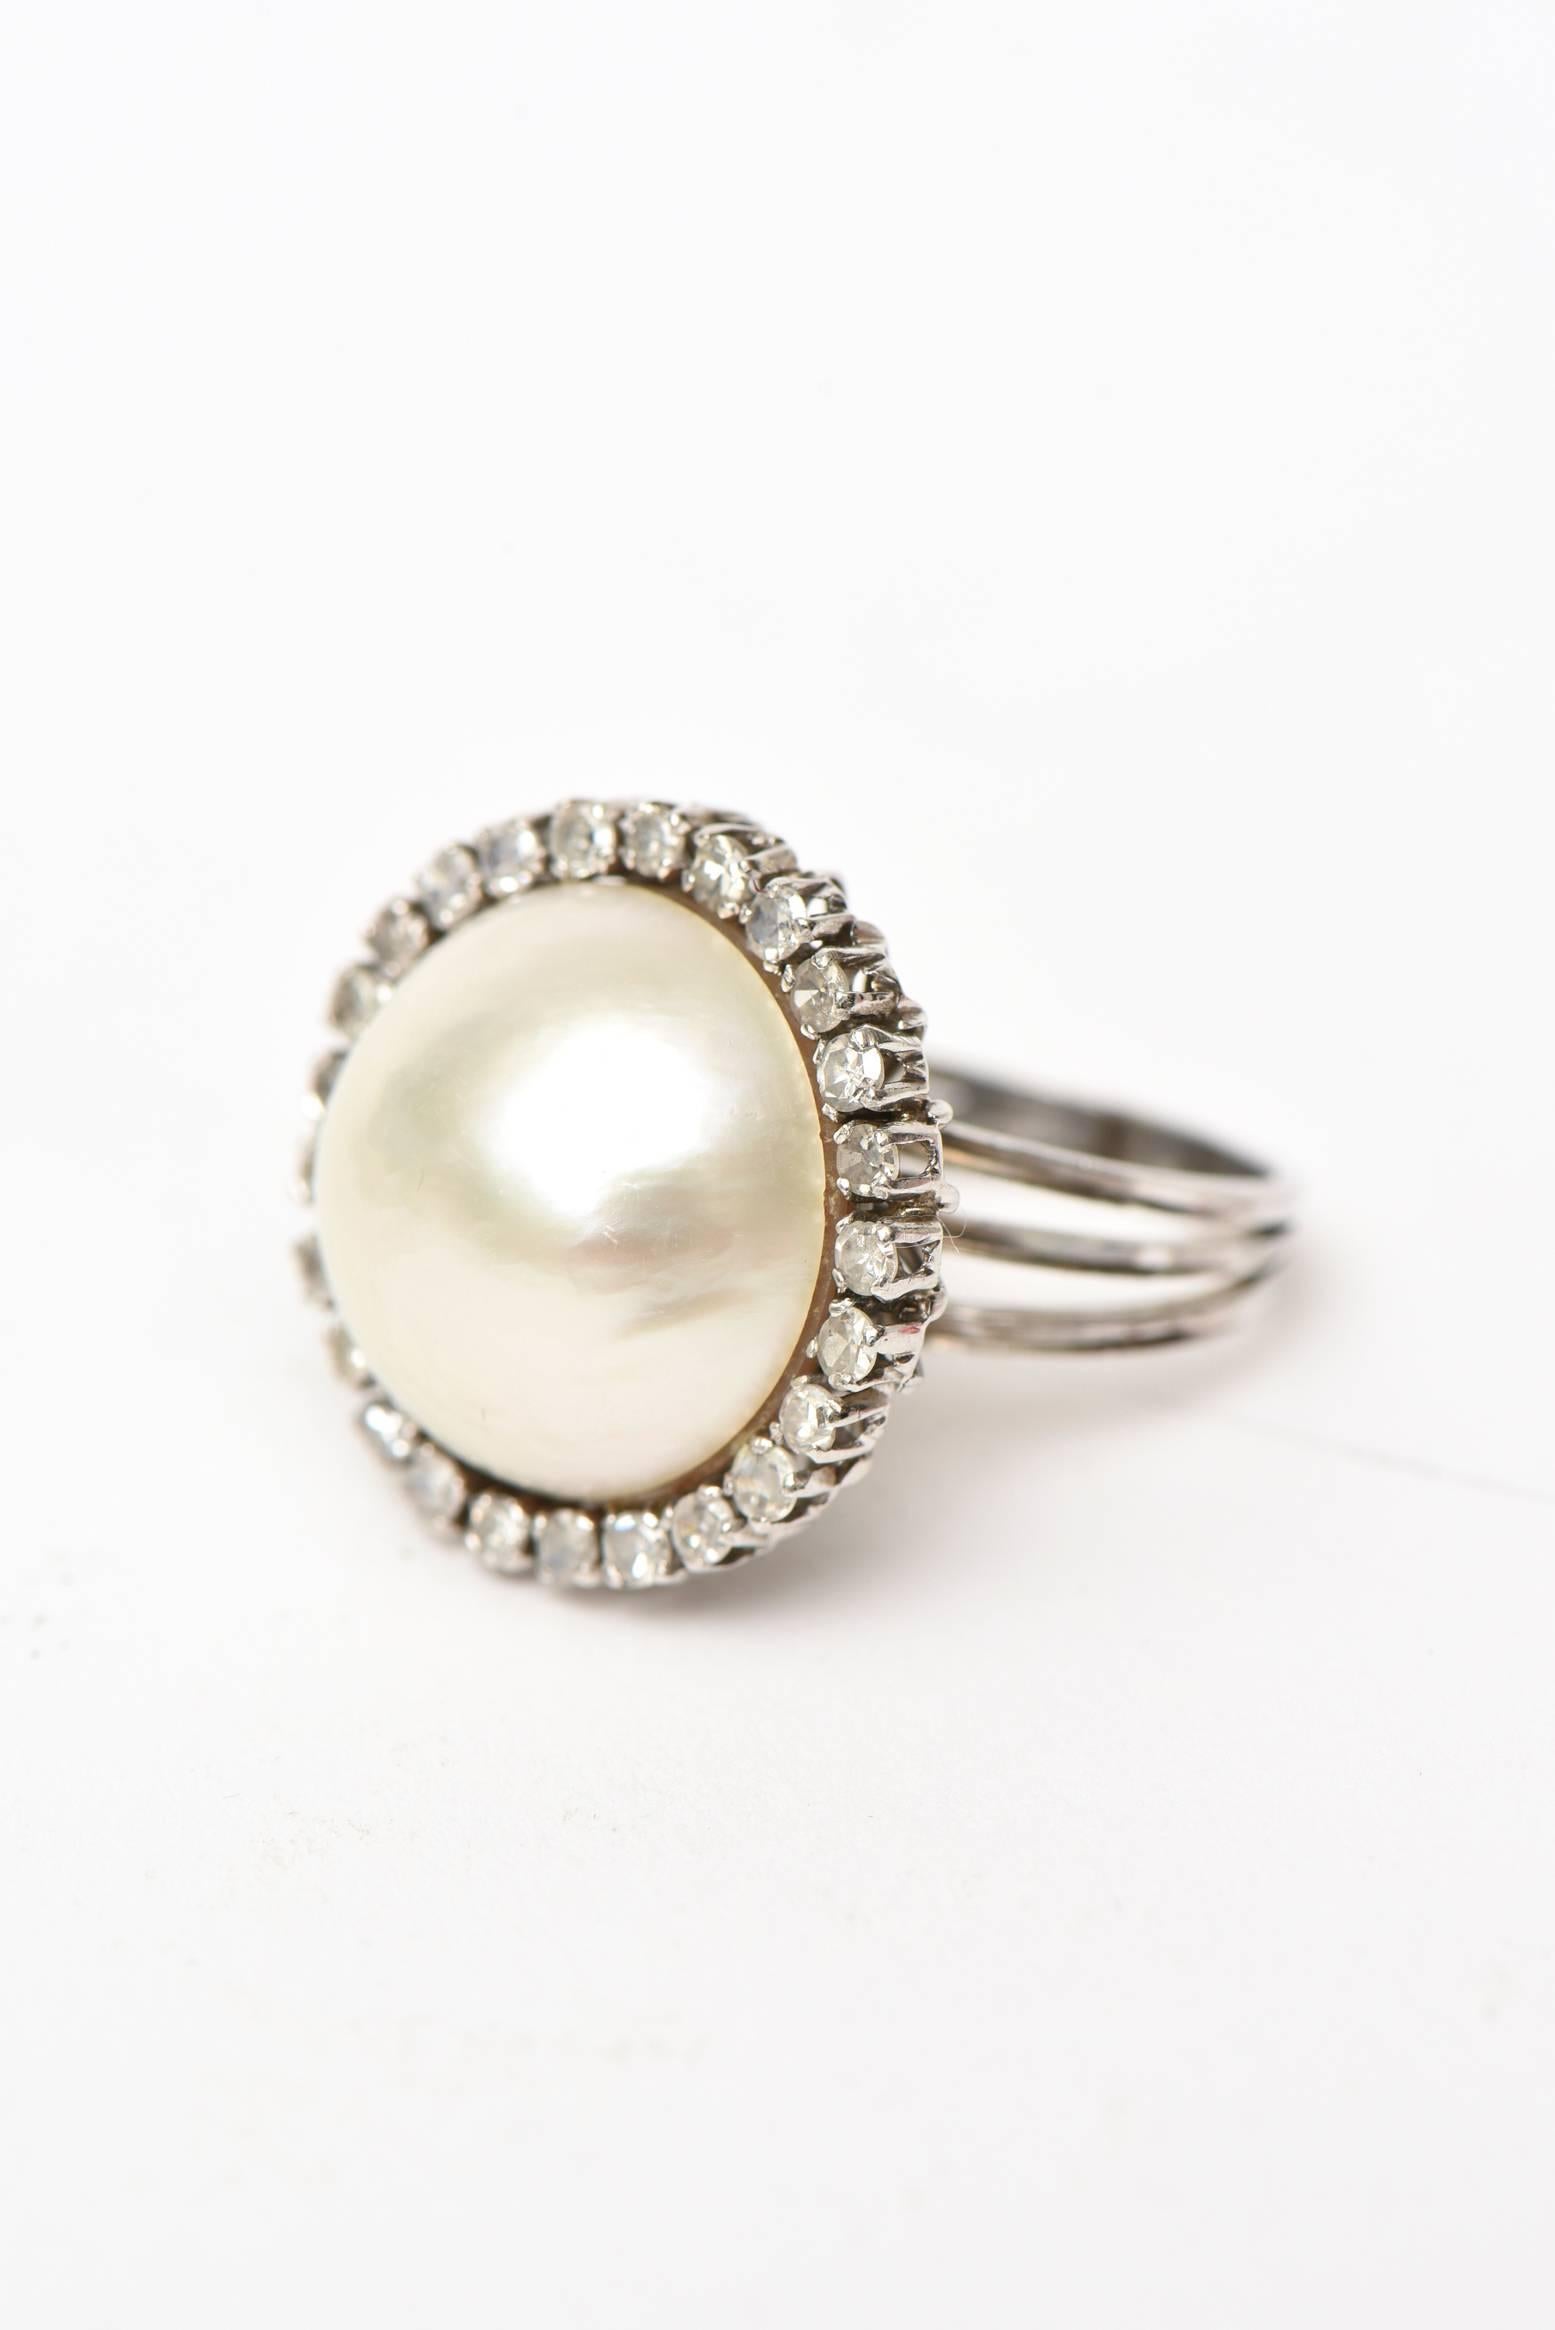 This 60's lovely vintage dome cocktail ring has a mabe pearl surrounded by 26 round diamonds. it is 14 K white gold. It has approximately one carat of diamonds surrounding the mabe pearl. The beautiful cage like design on the back is in 14 Karat